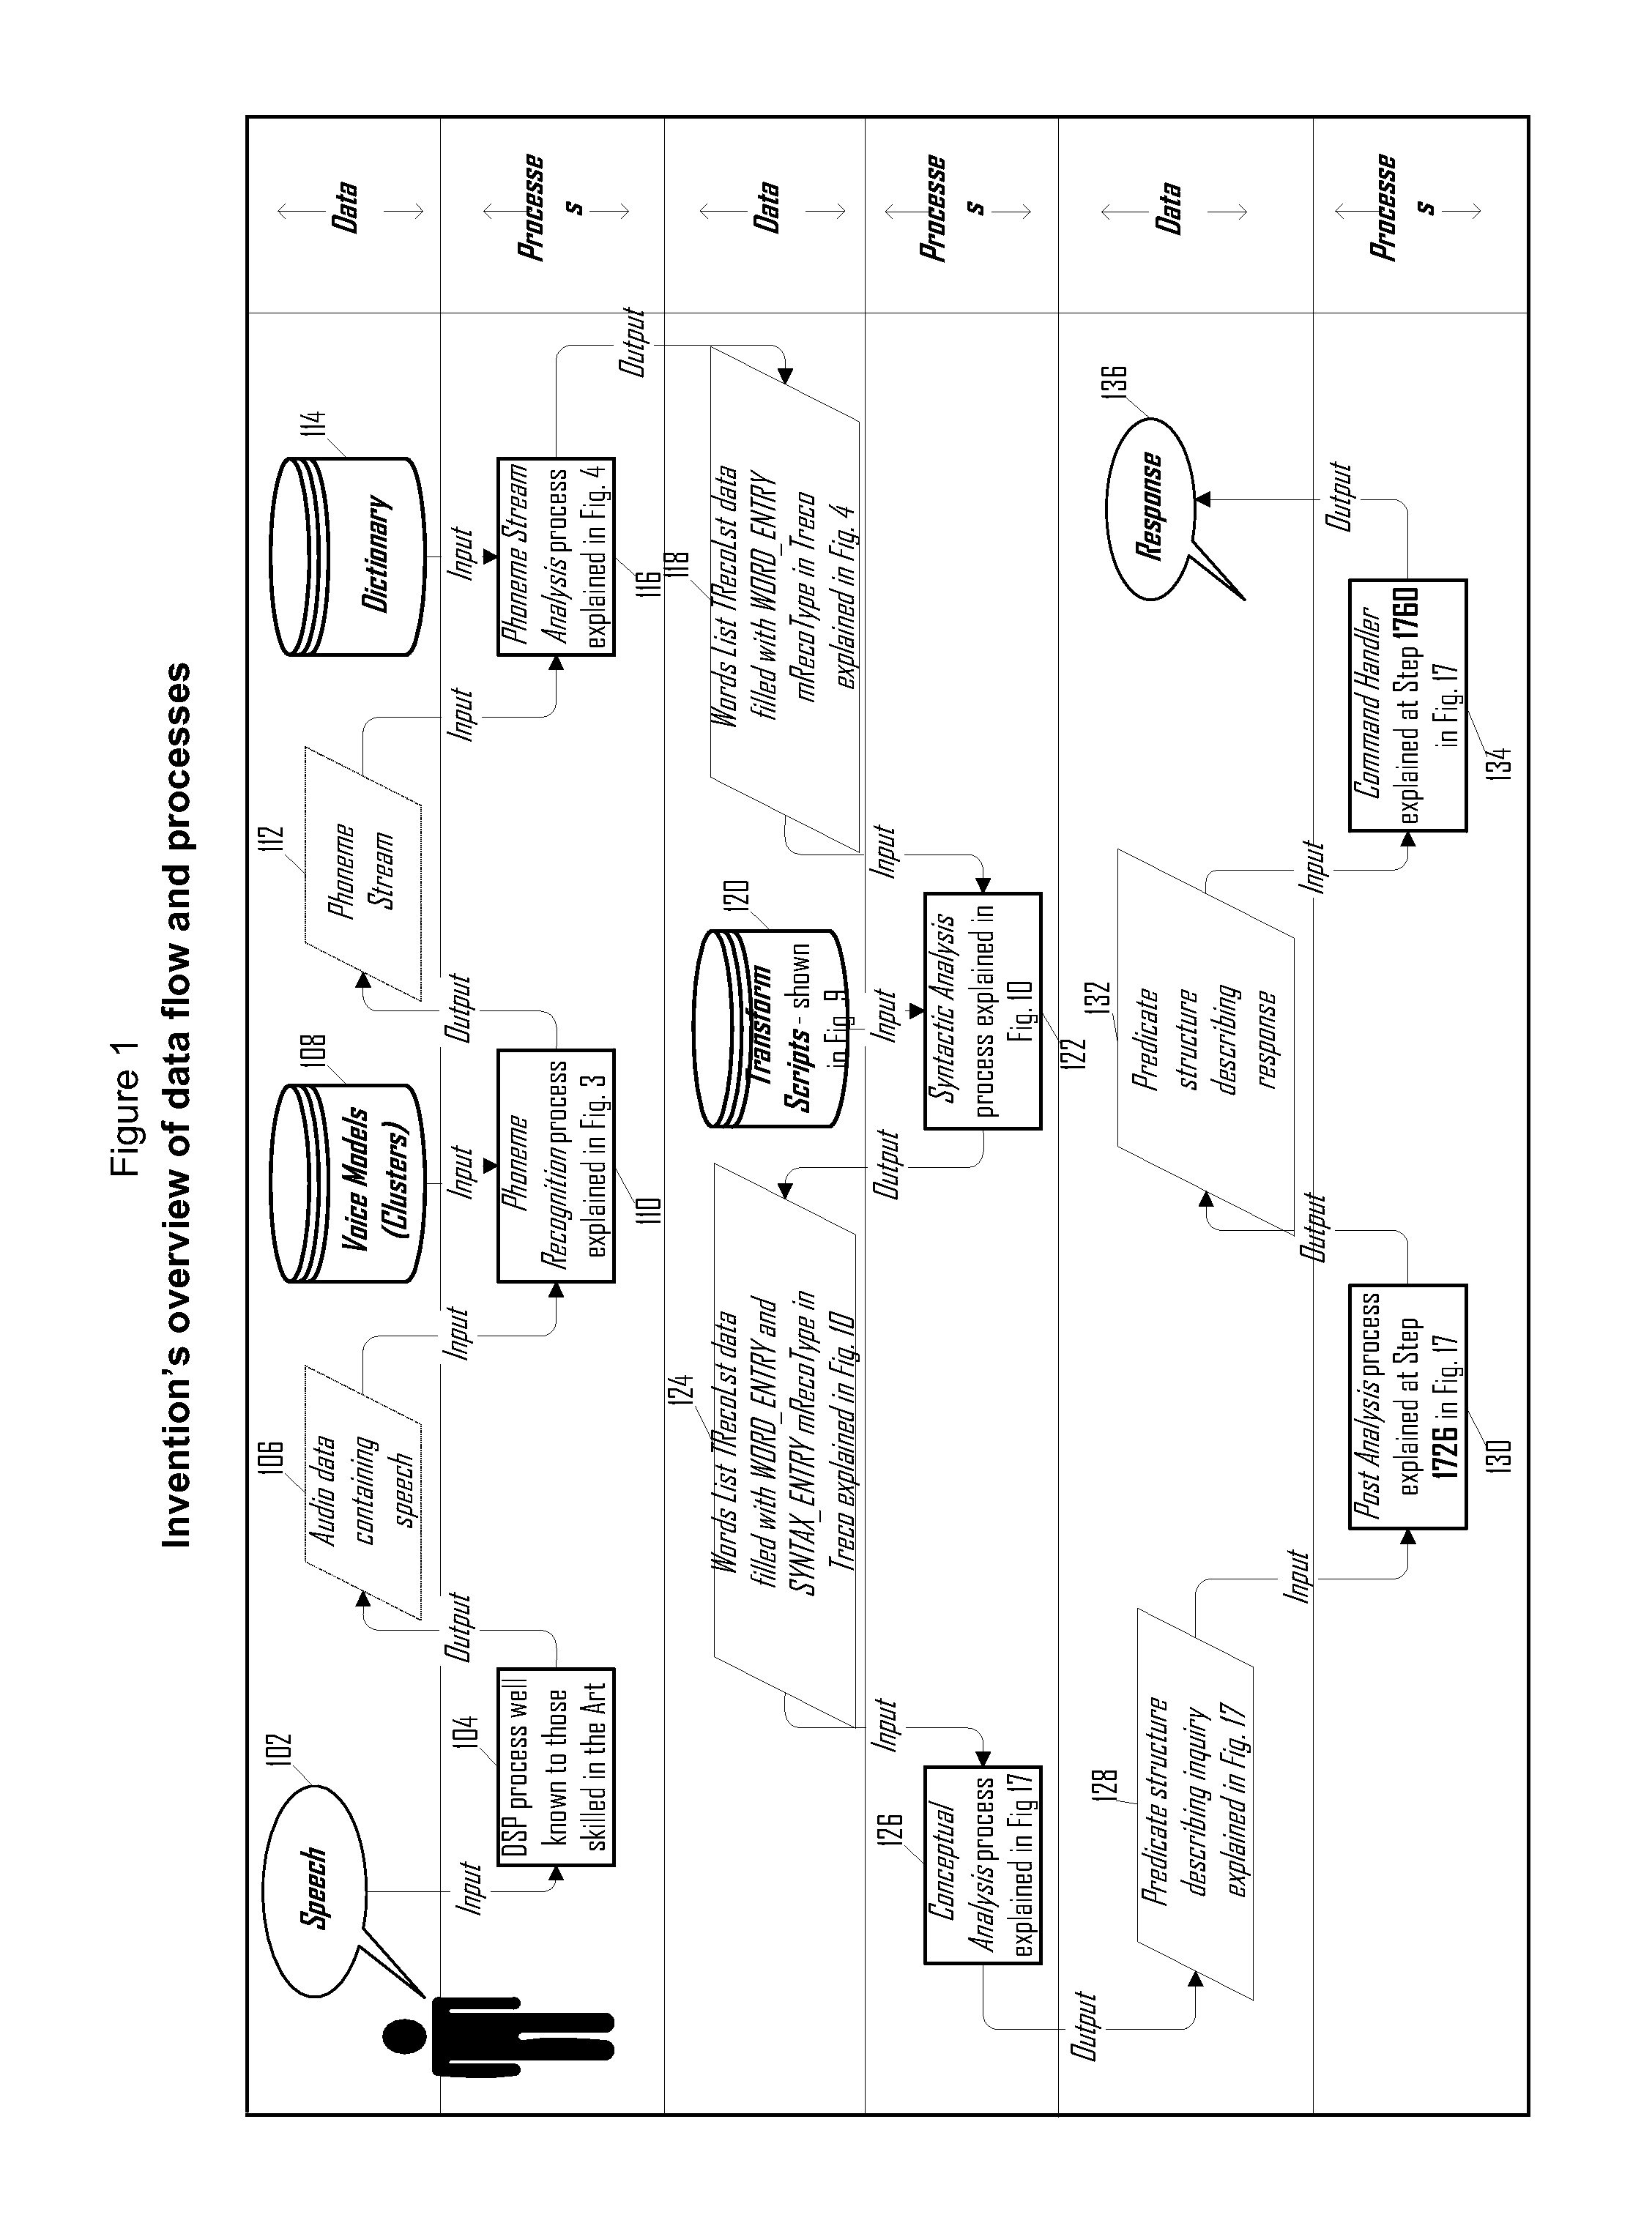 Conceptual analysis driven data-mining and dictation system and method